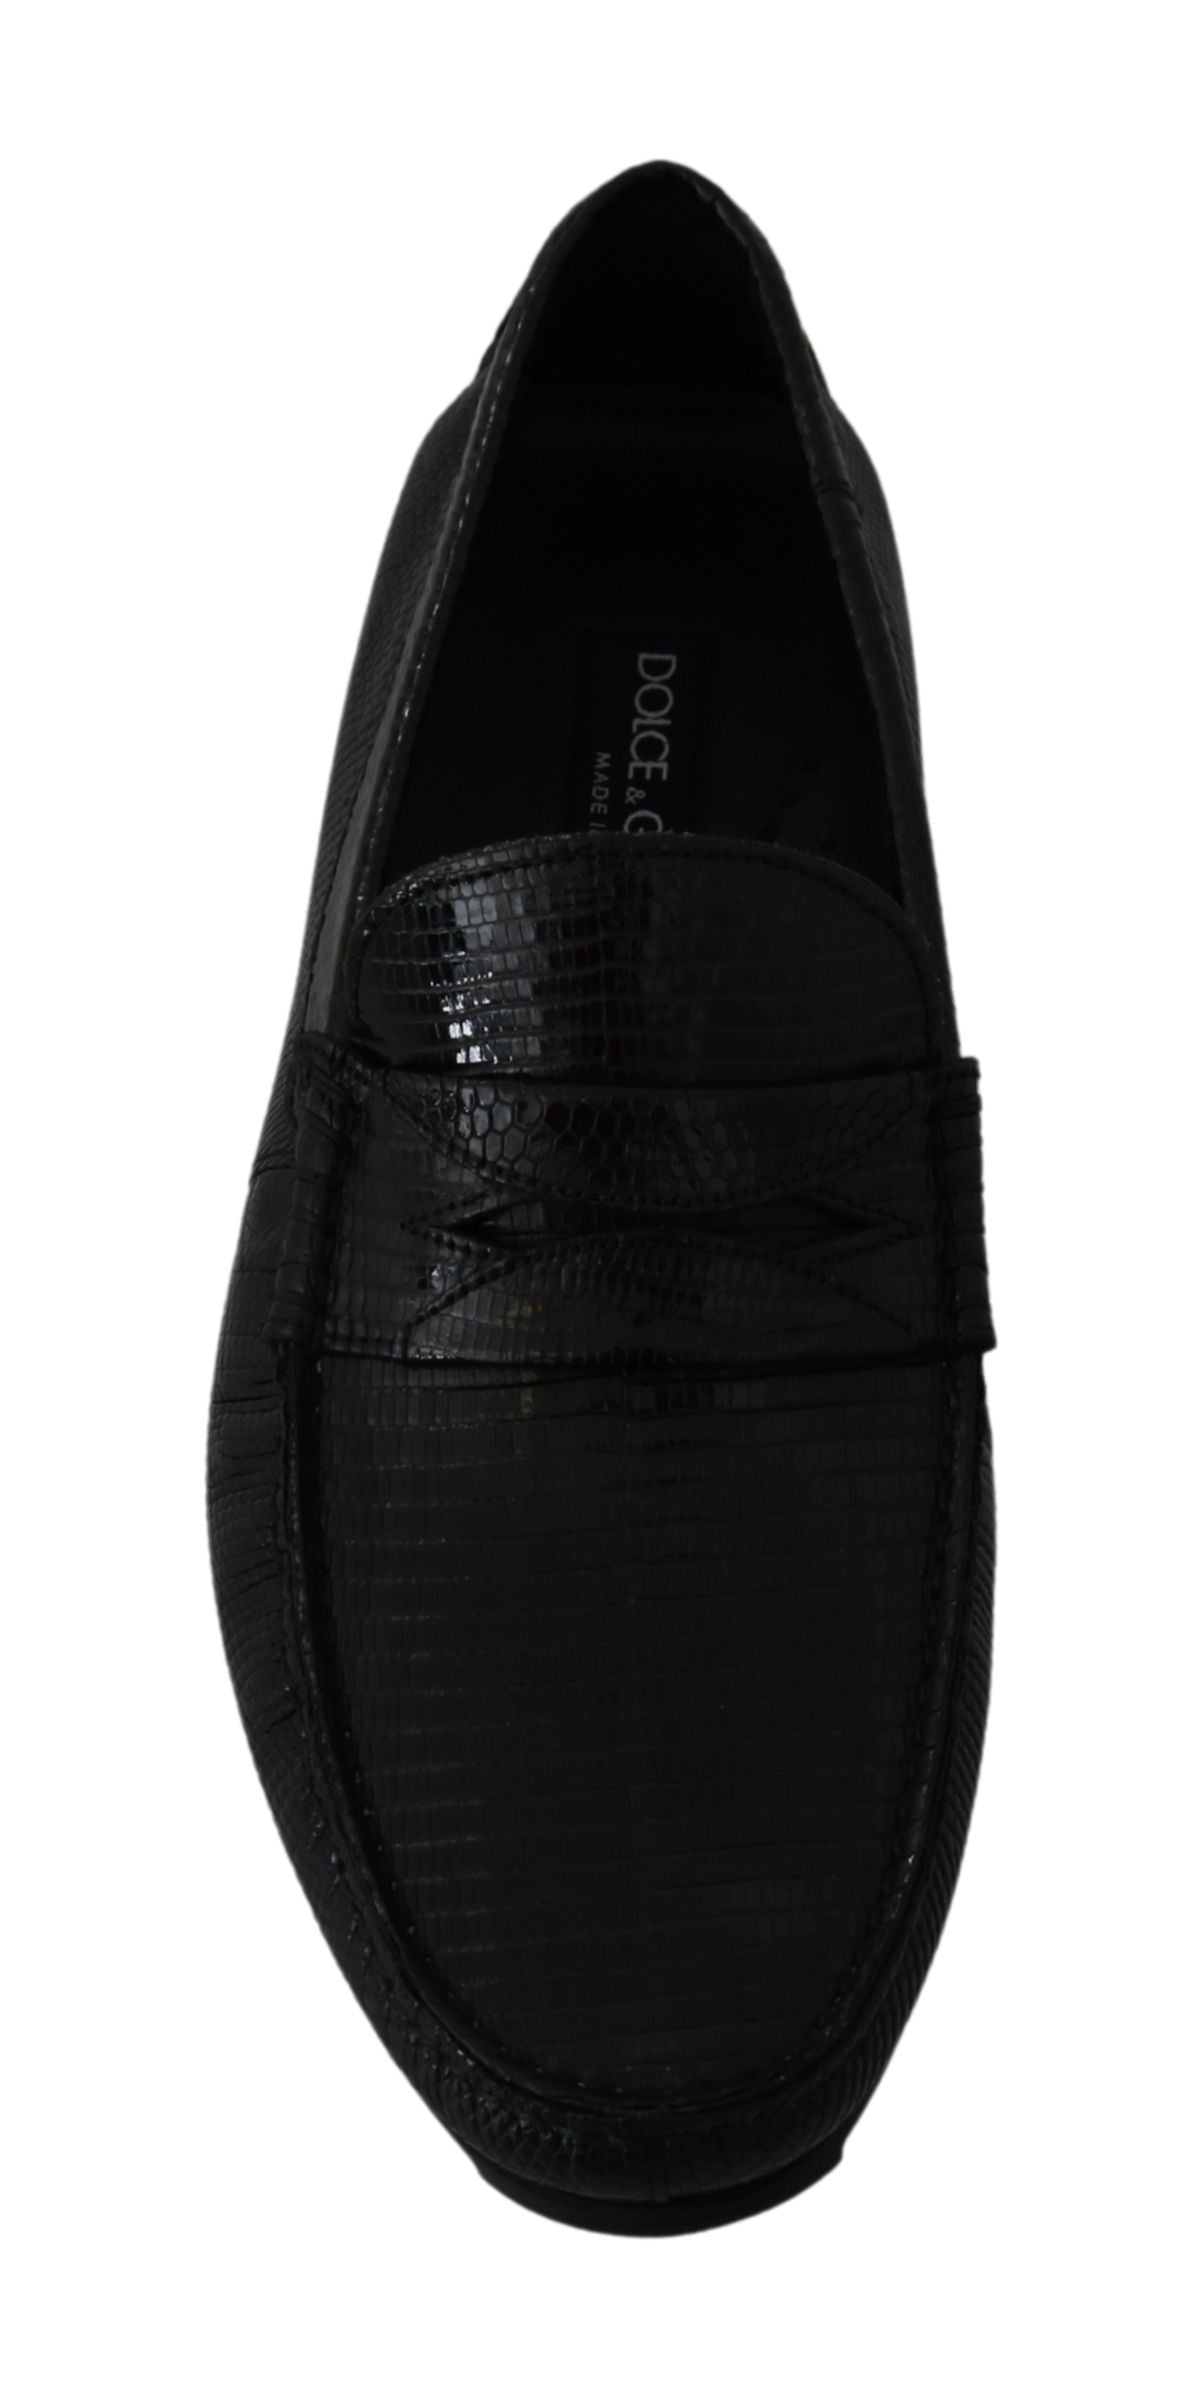 Dolce & Gabbana Black Lizard Leather Flat Loafers Shoes